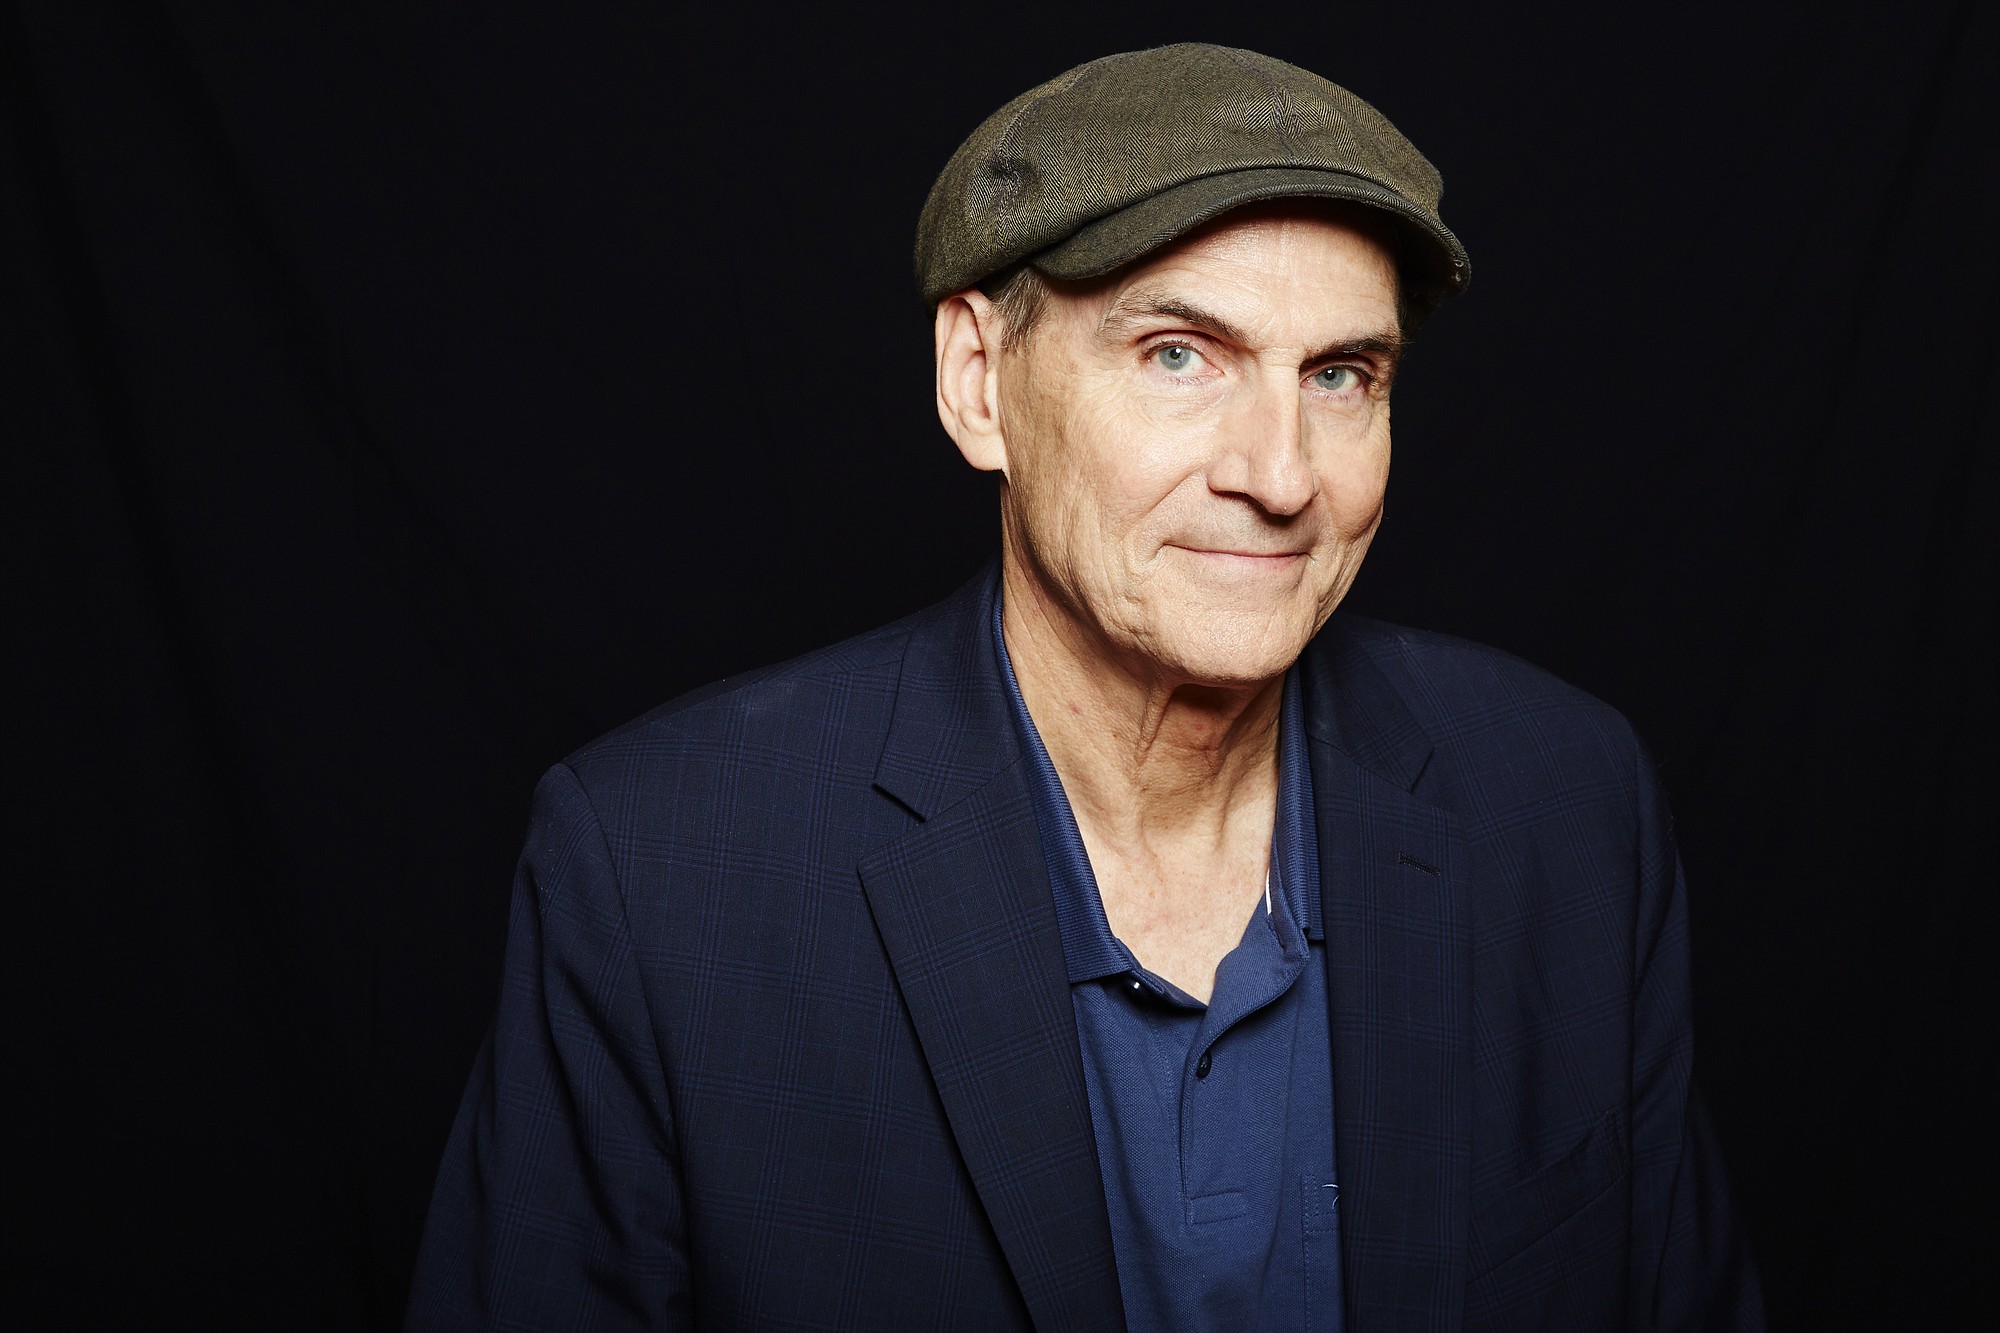 Grammy Award winning singer-songwriter James Taylor released his latest album, &quot;Before This World,&quot; late last month.